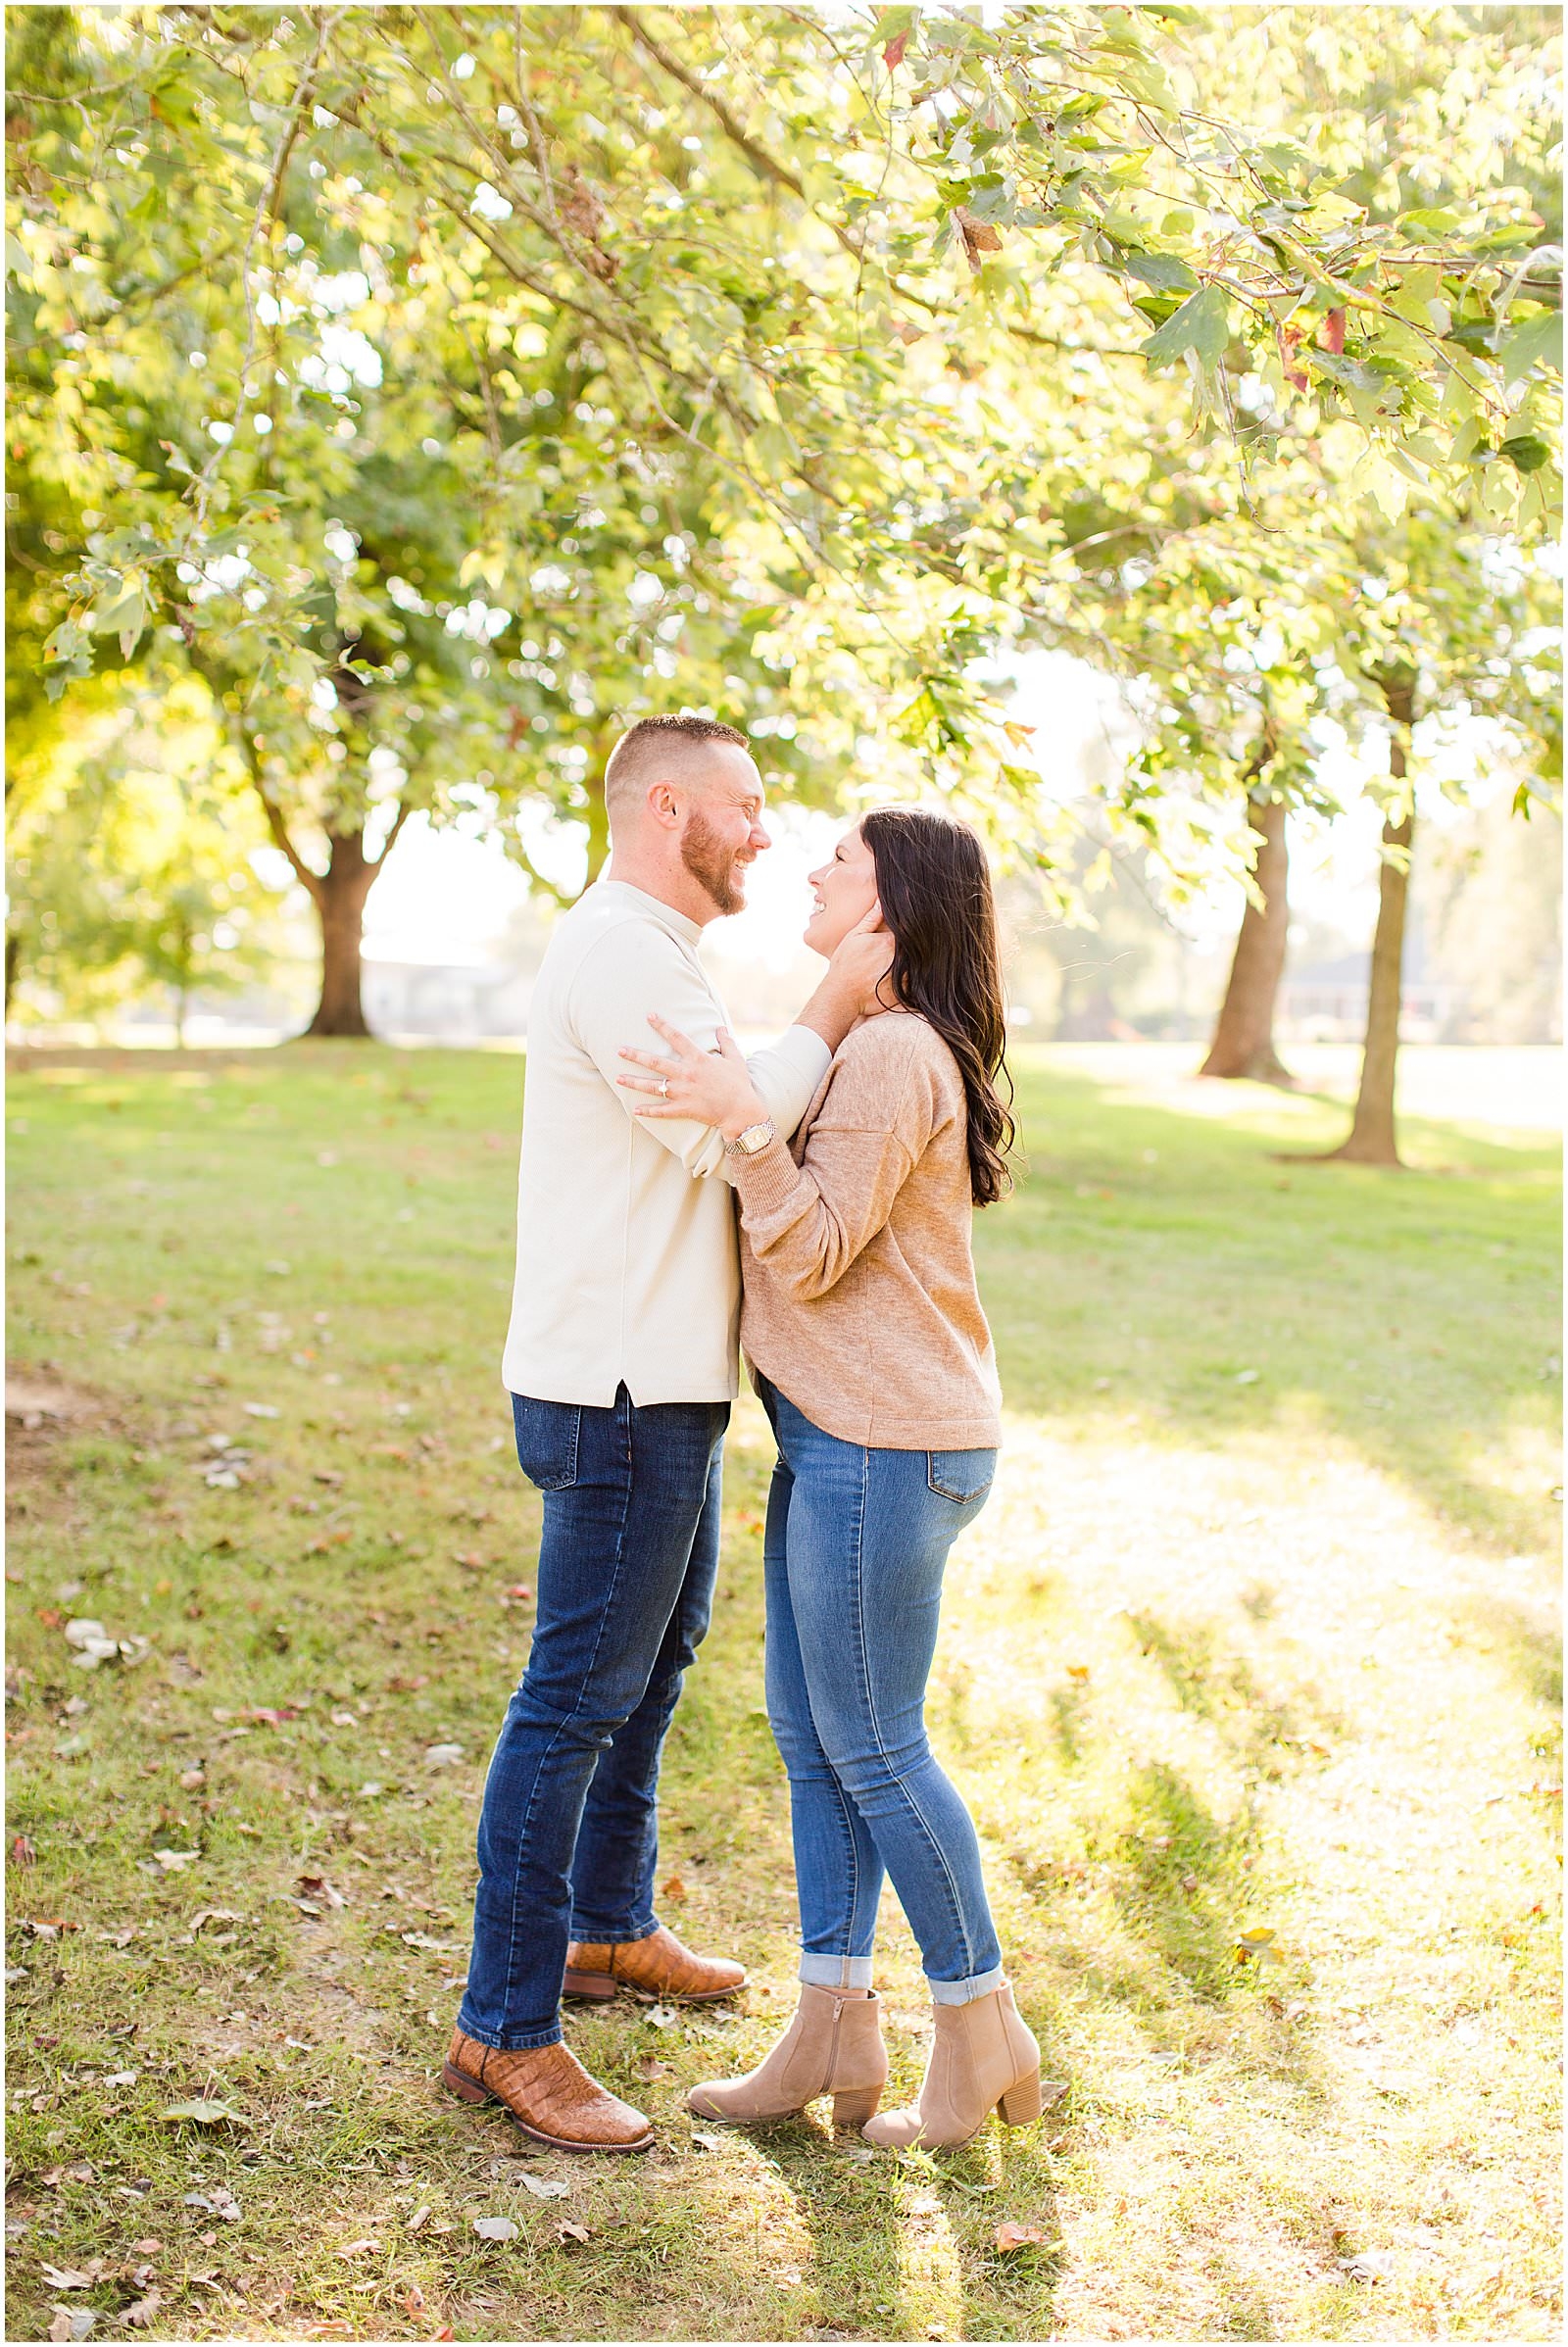 A Rolling Hills Country Club Engagement Session | Meagan and Kyle | Bret and Brandie Photography 0016.jpg